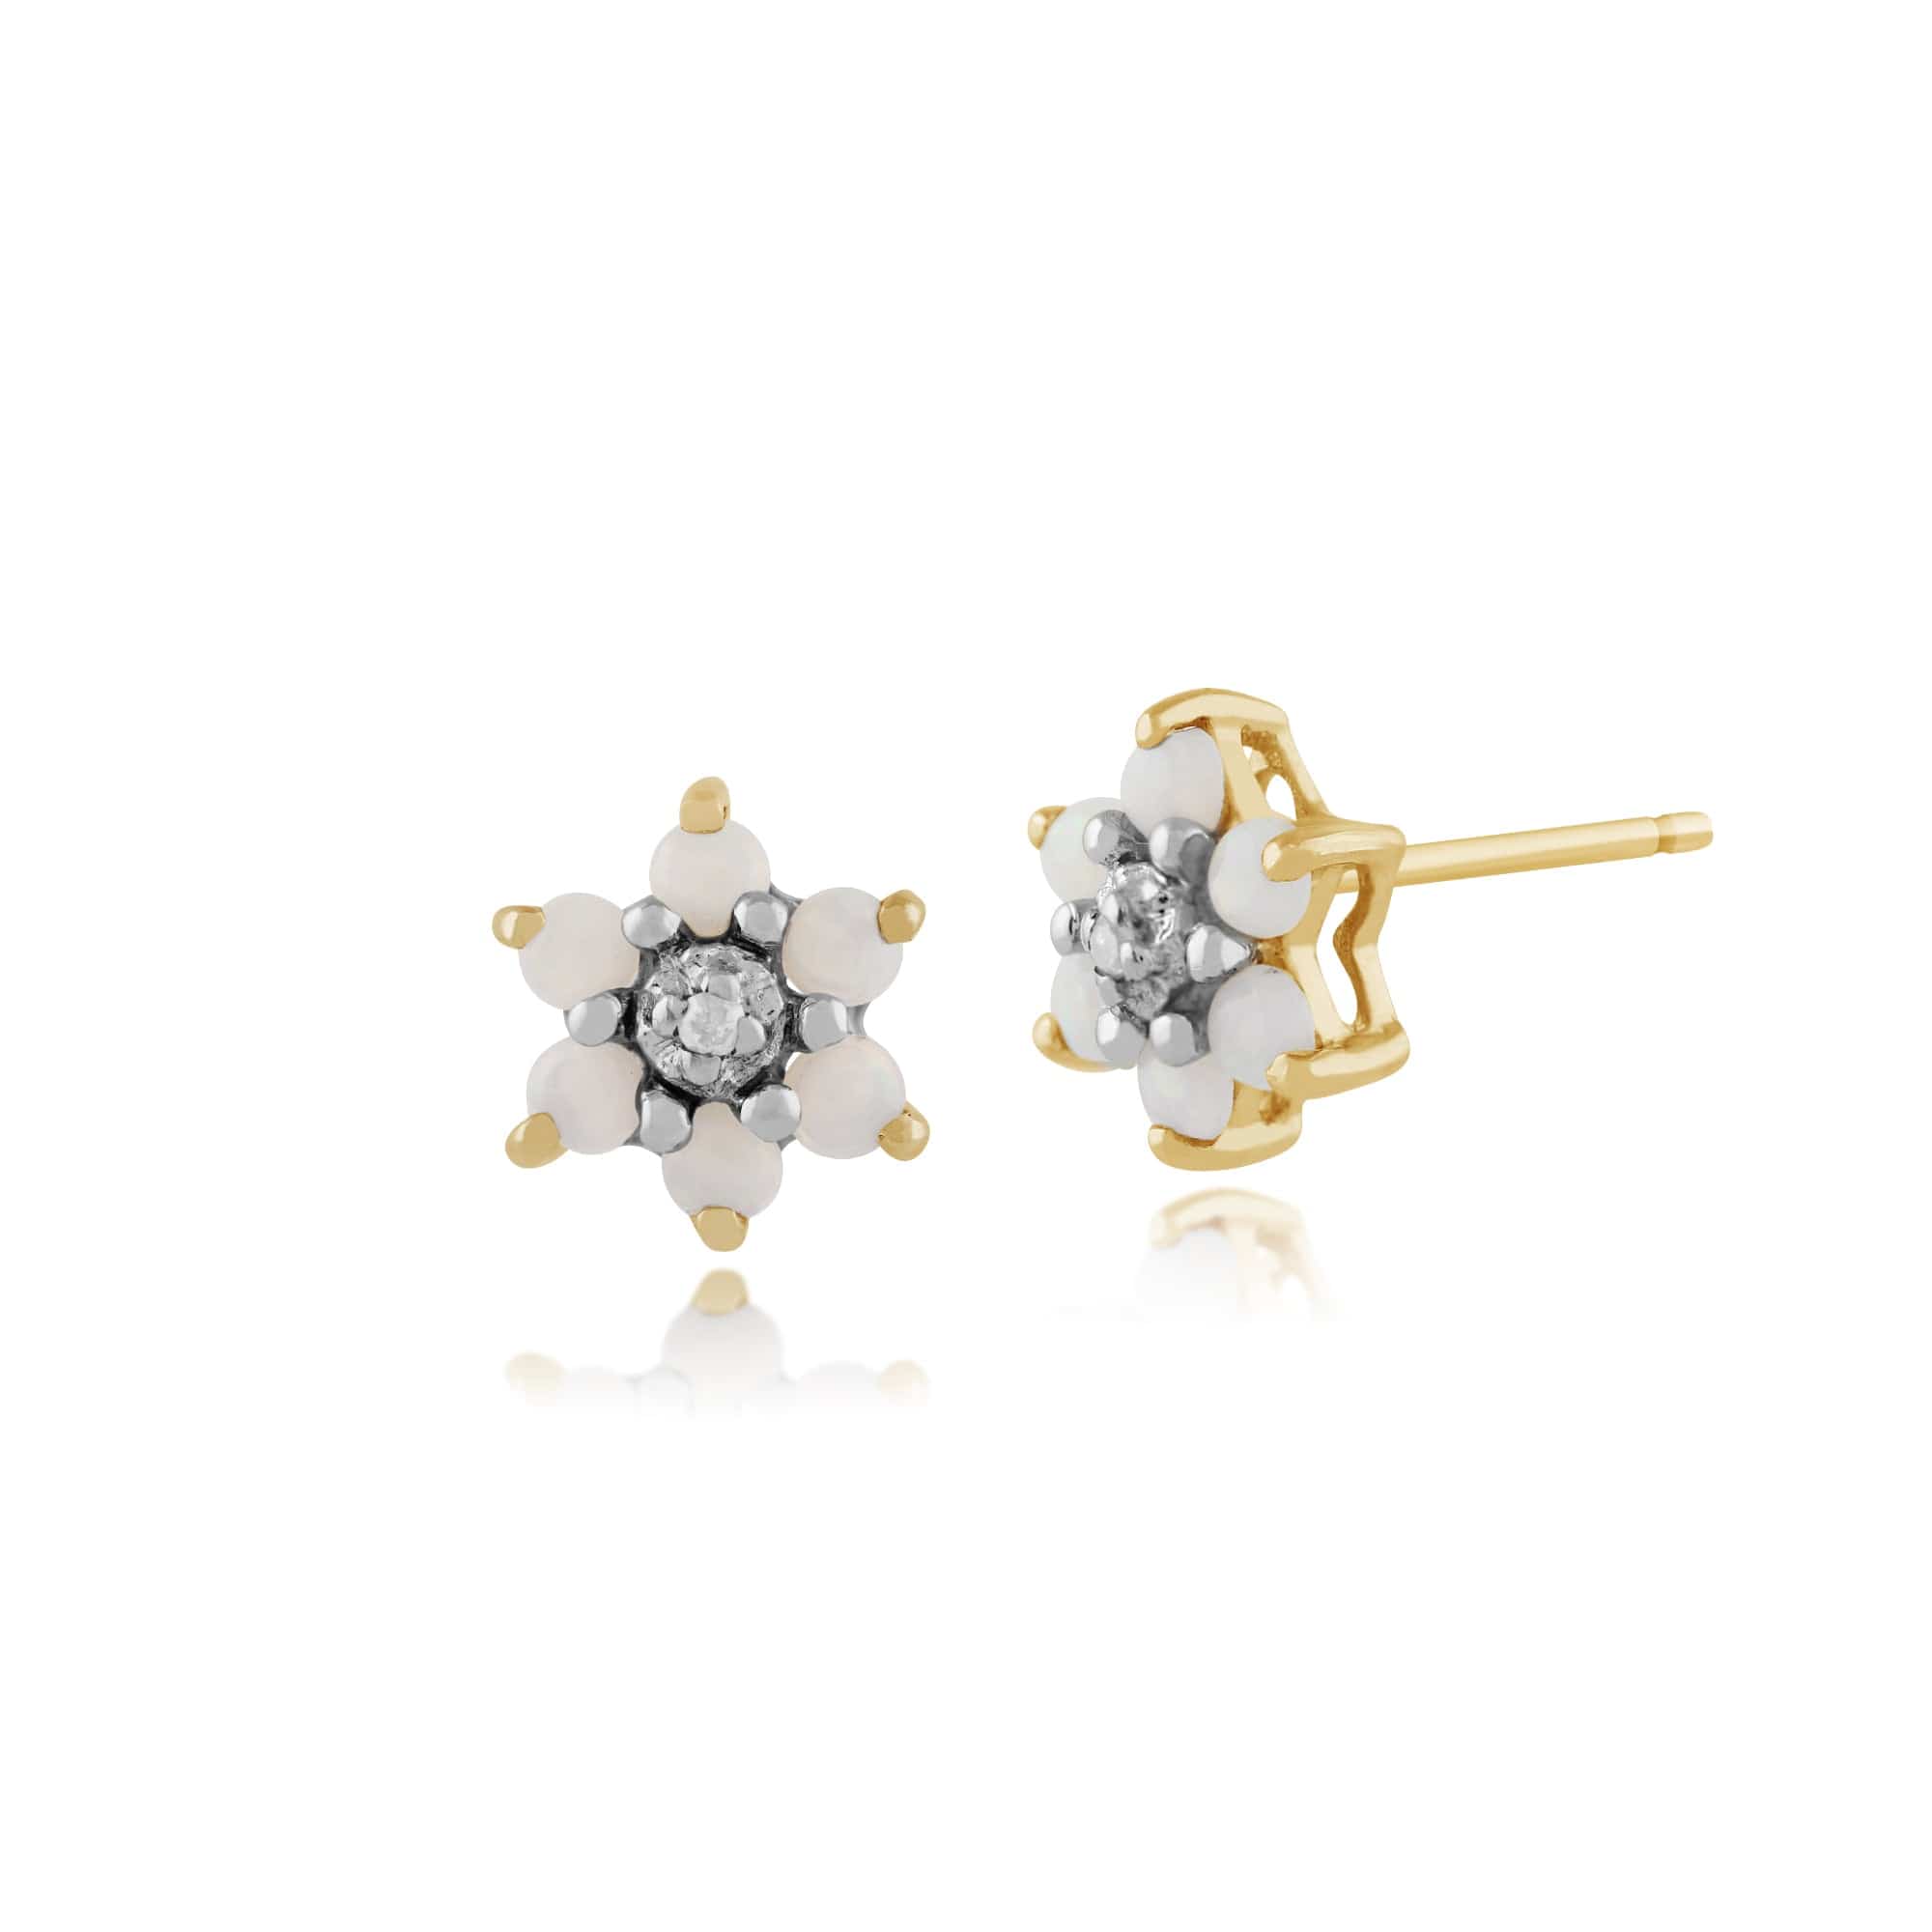 Floral Round Opal & Diamond Stud Earrings in 9ct Yellow Gold - Gemondo